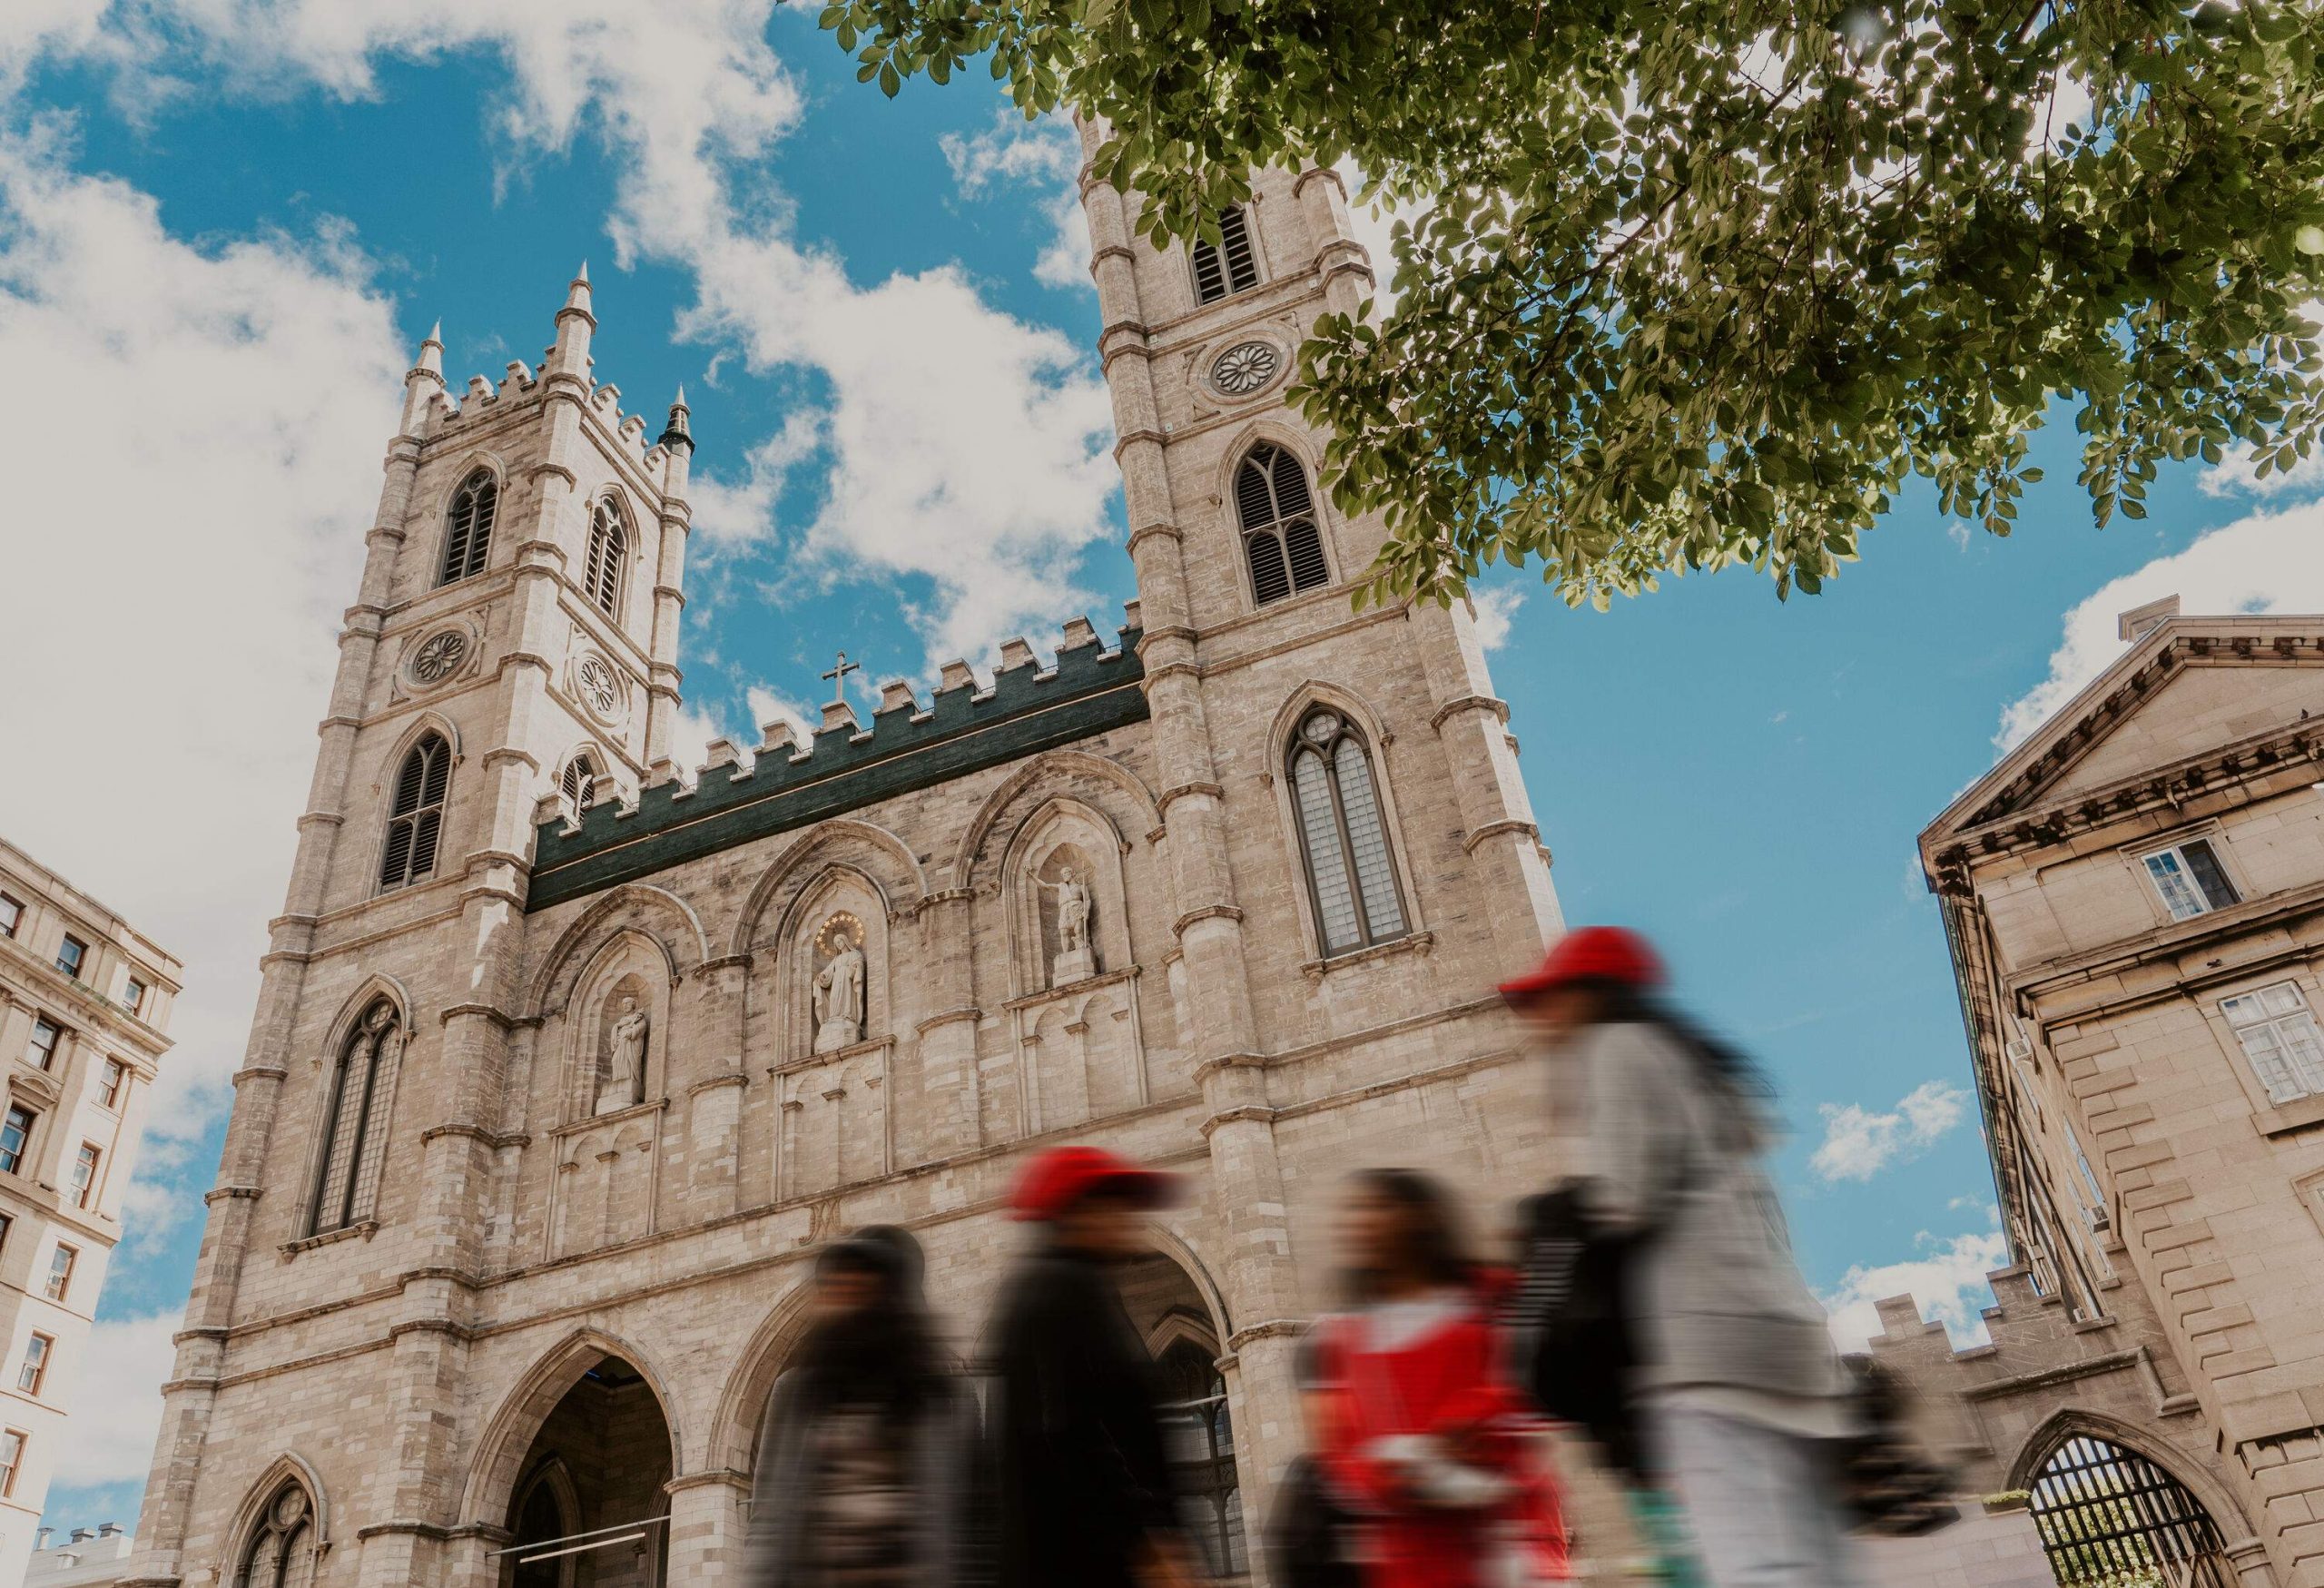 The Notre-Dame Basilica in Montreal, with its ornate Gothic Revival architecture, stunning stained glass windows, and imposing grandeur, stands as a testament to the rich cultural and religious heritage of Quebec, Canada.